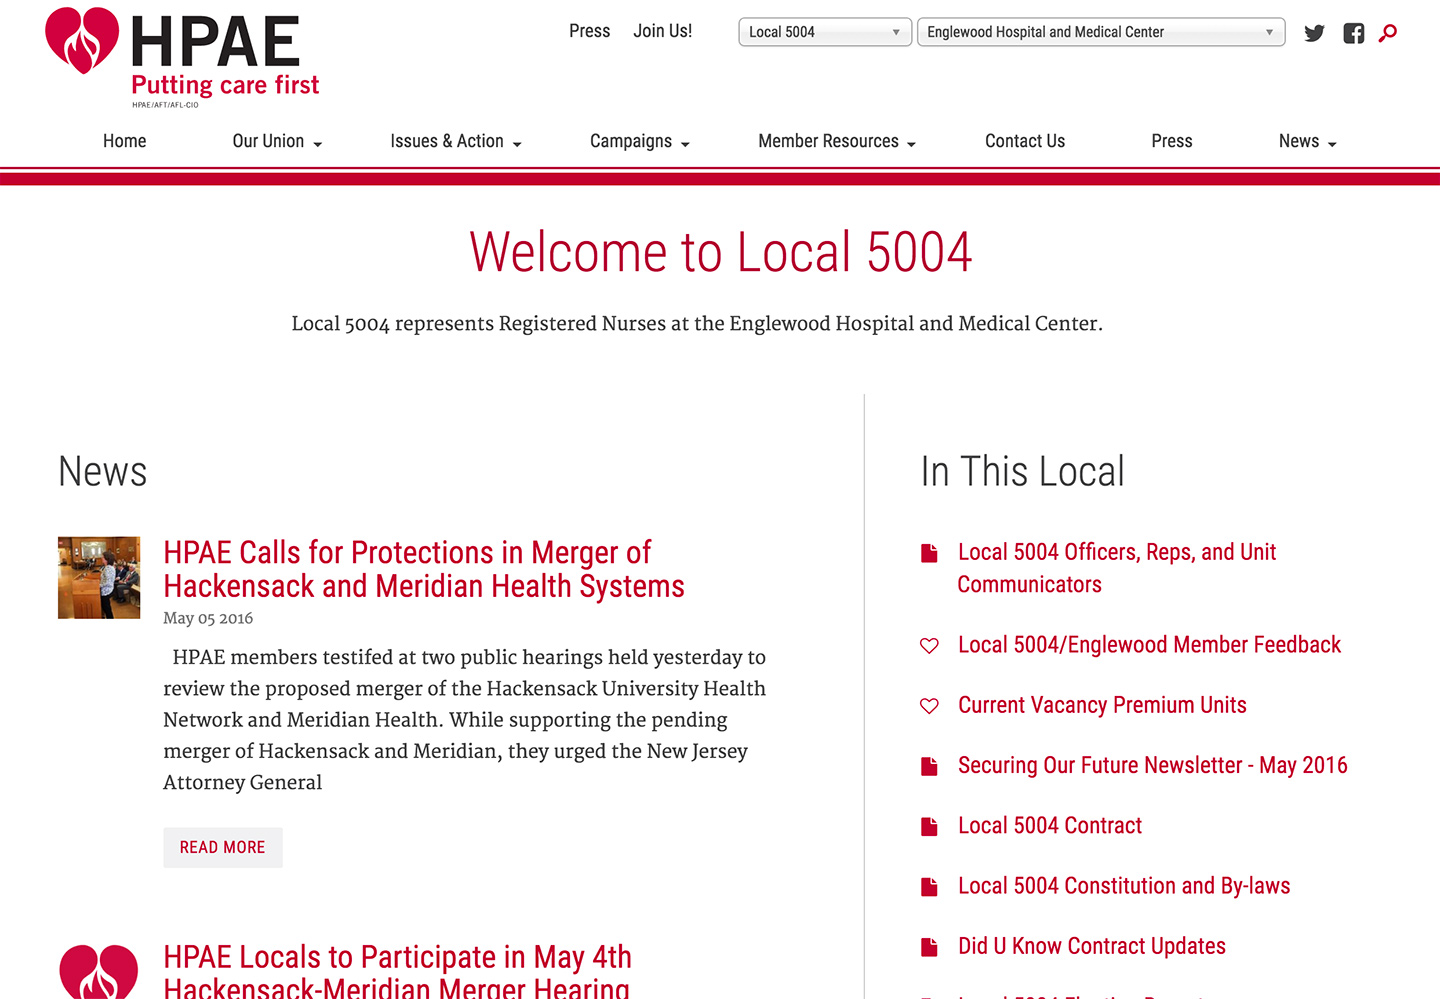 HPAE - Health Professionals and Allied Employees: Local Hub